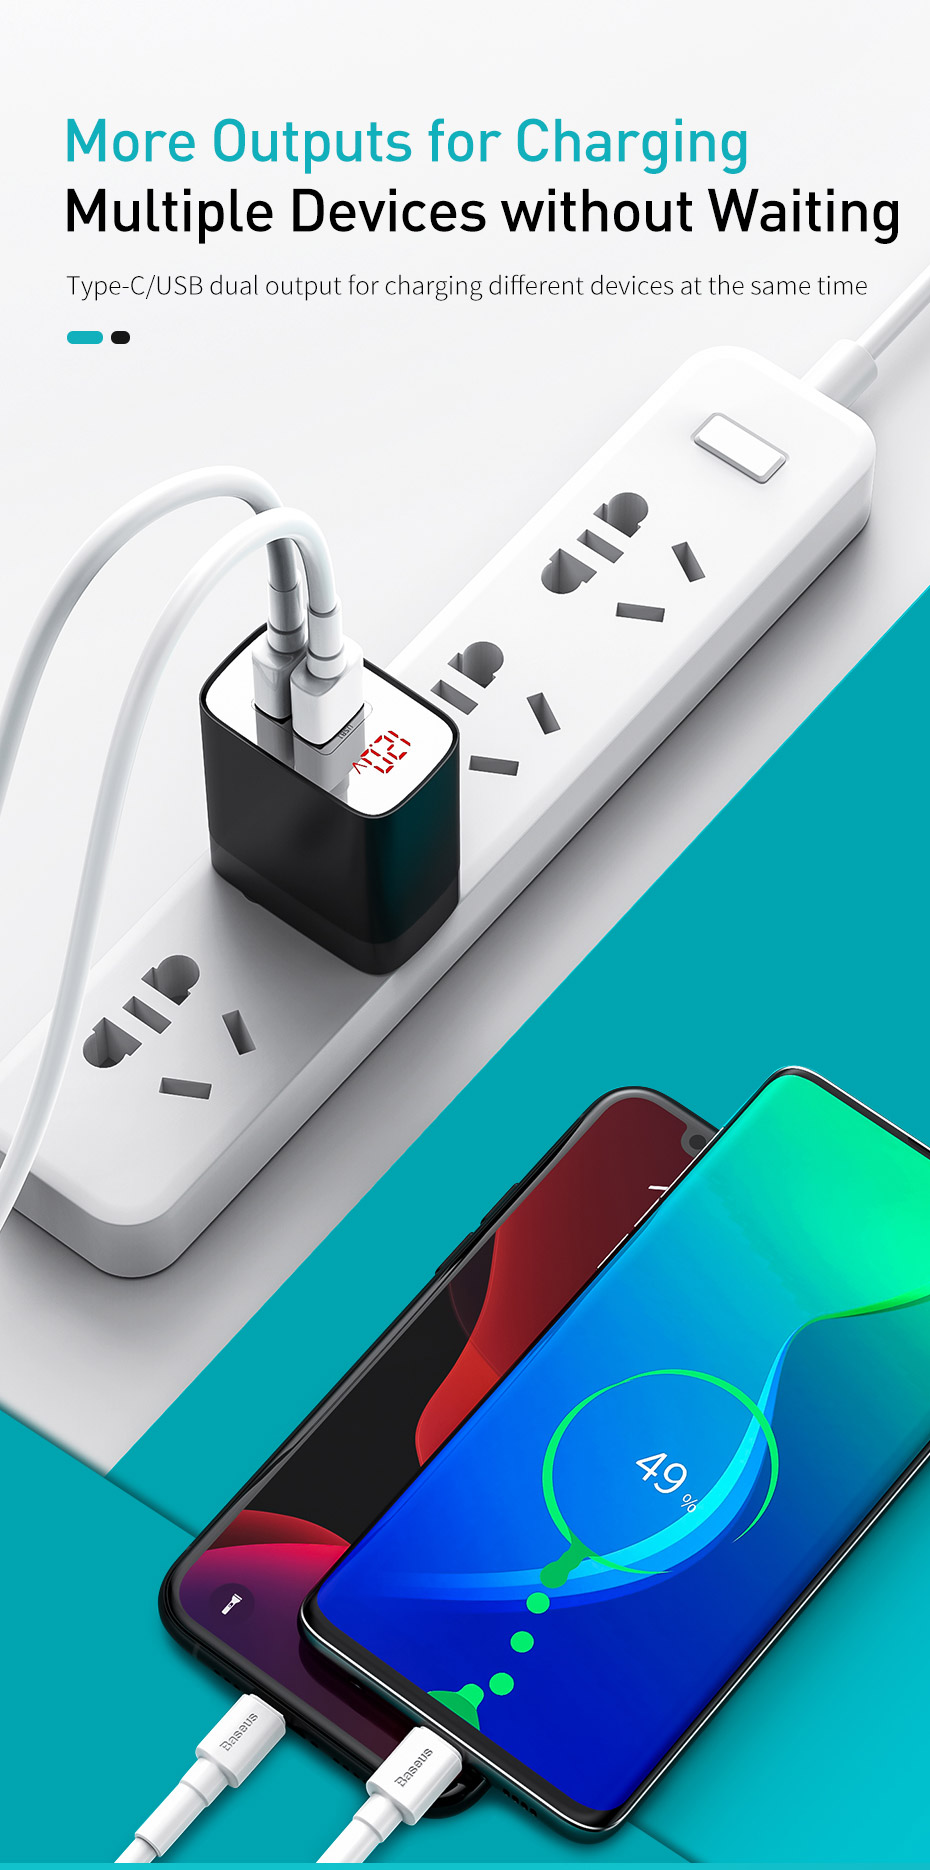 Baseus-18W-Dual-USB-Charger-QC30-PD30-LED-Display-Fast-Charging-For-iPhone-XS-11Pro-Mi10-Note-9S-1684204-7